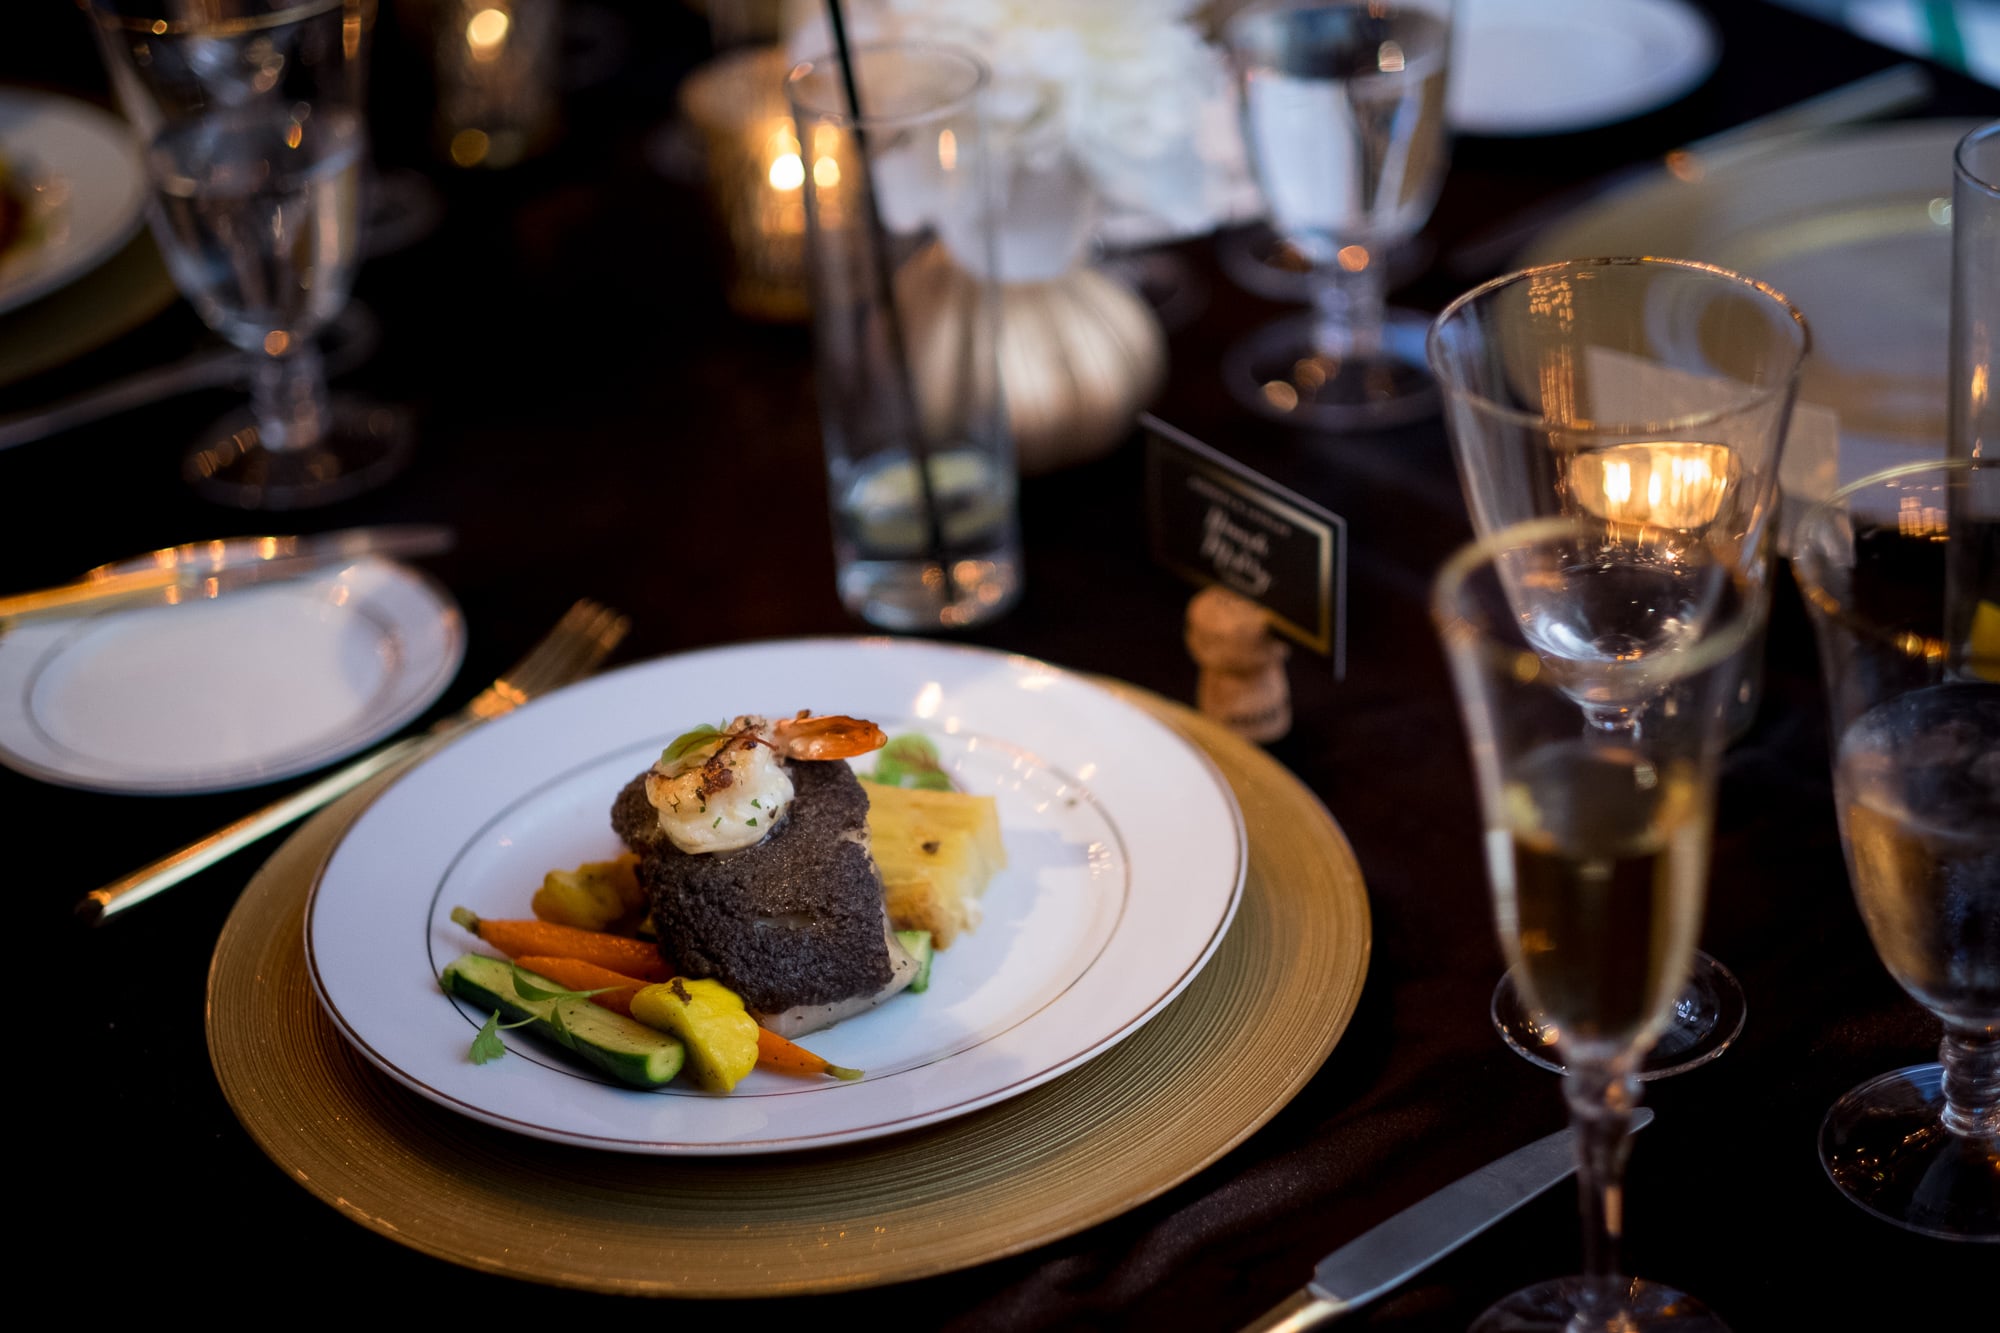  A detail shot of the main course from a wedding reception at the Fermenting Cellar in Toronto's Distillery District. 